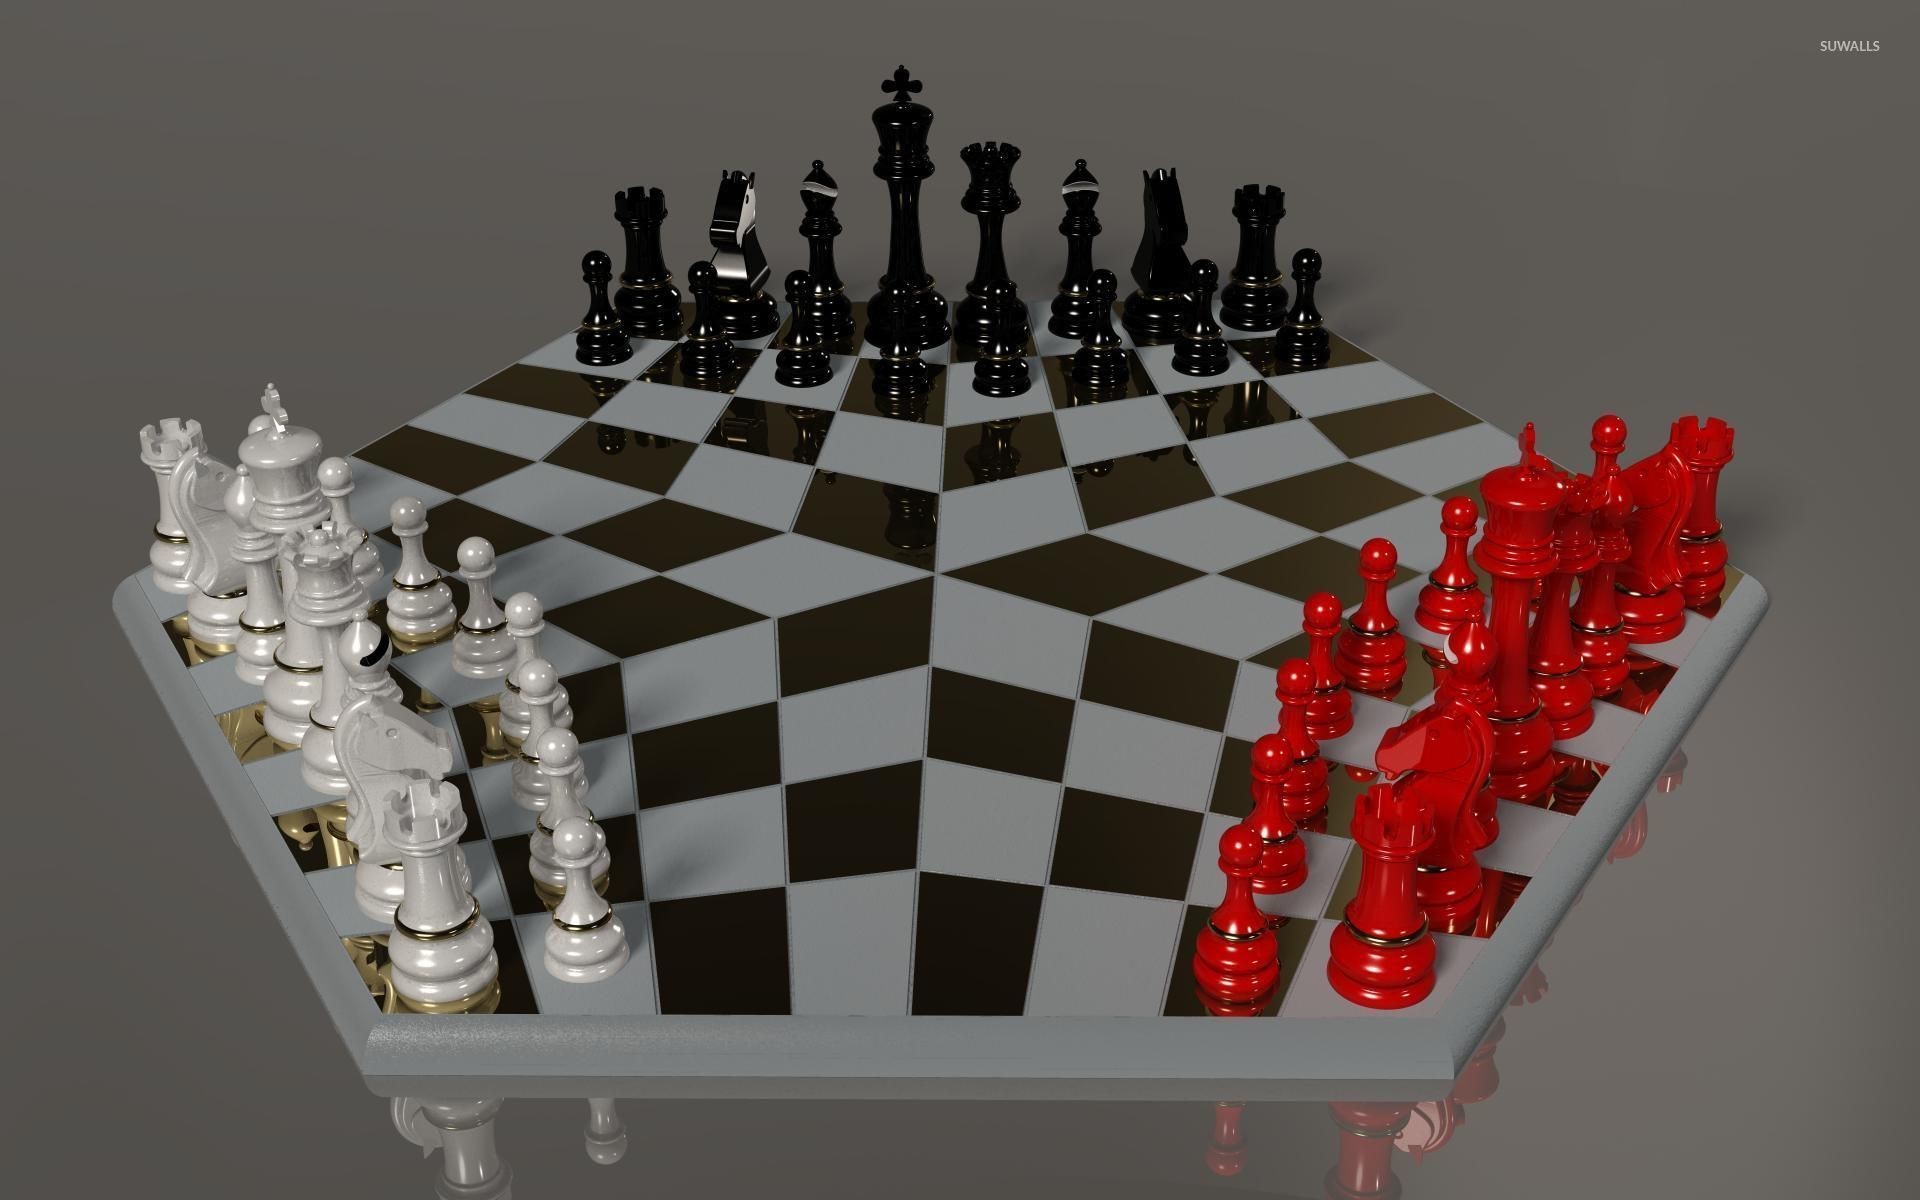 Black, white and red chess pieces wallpaper